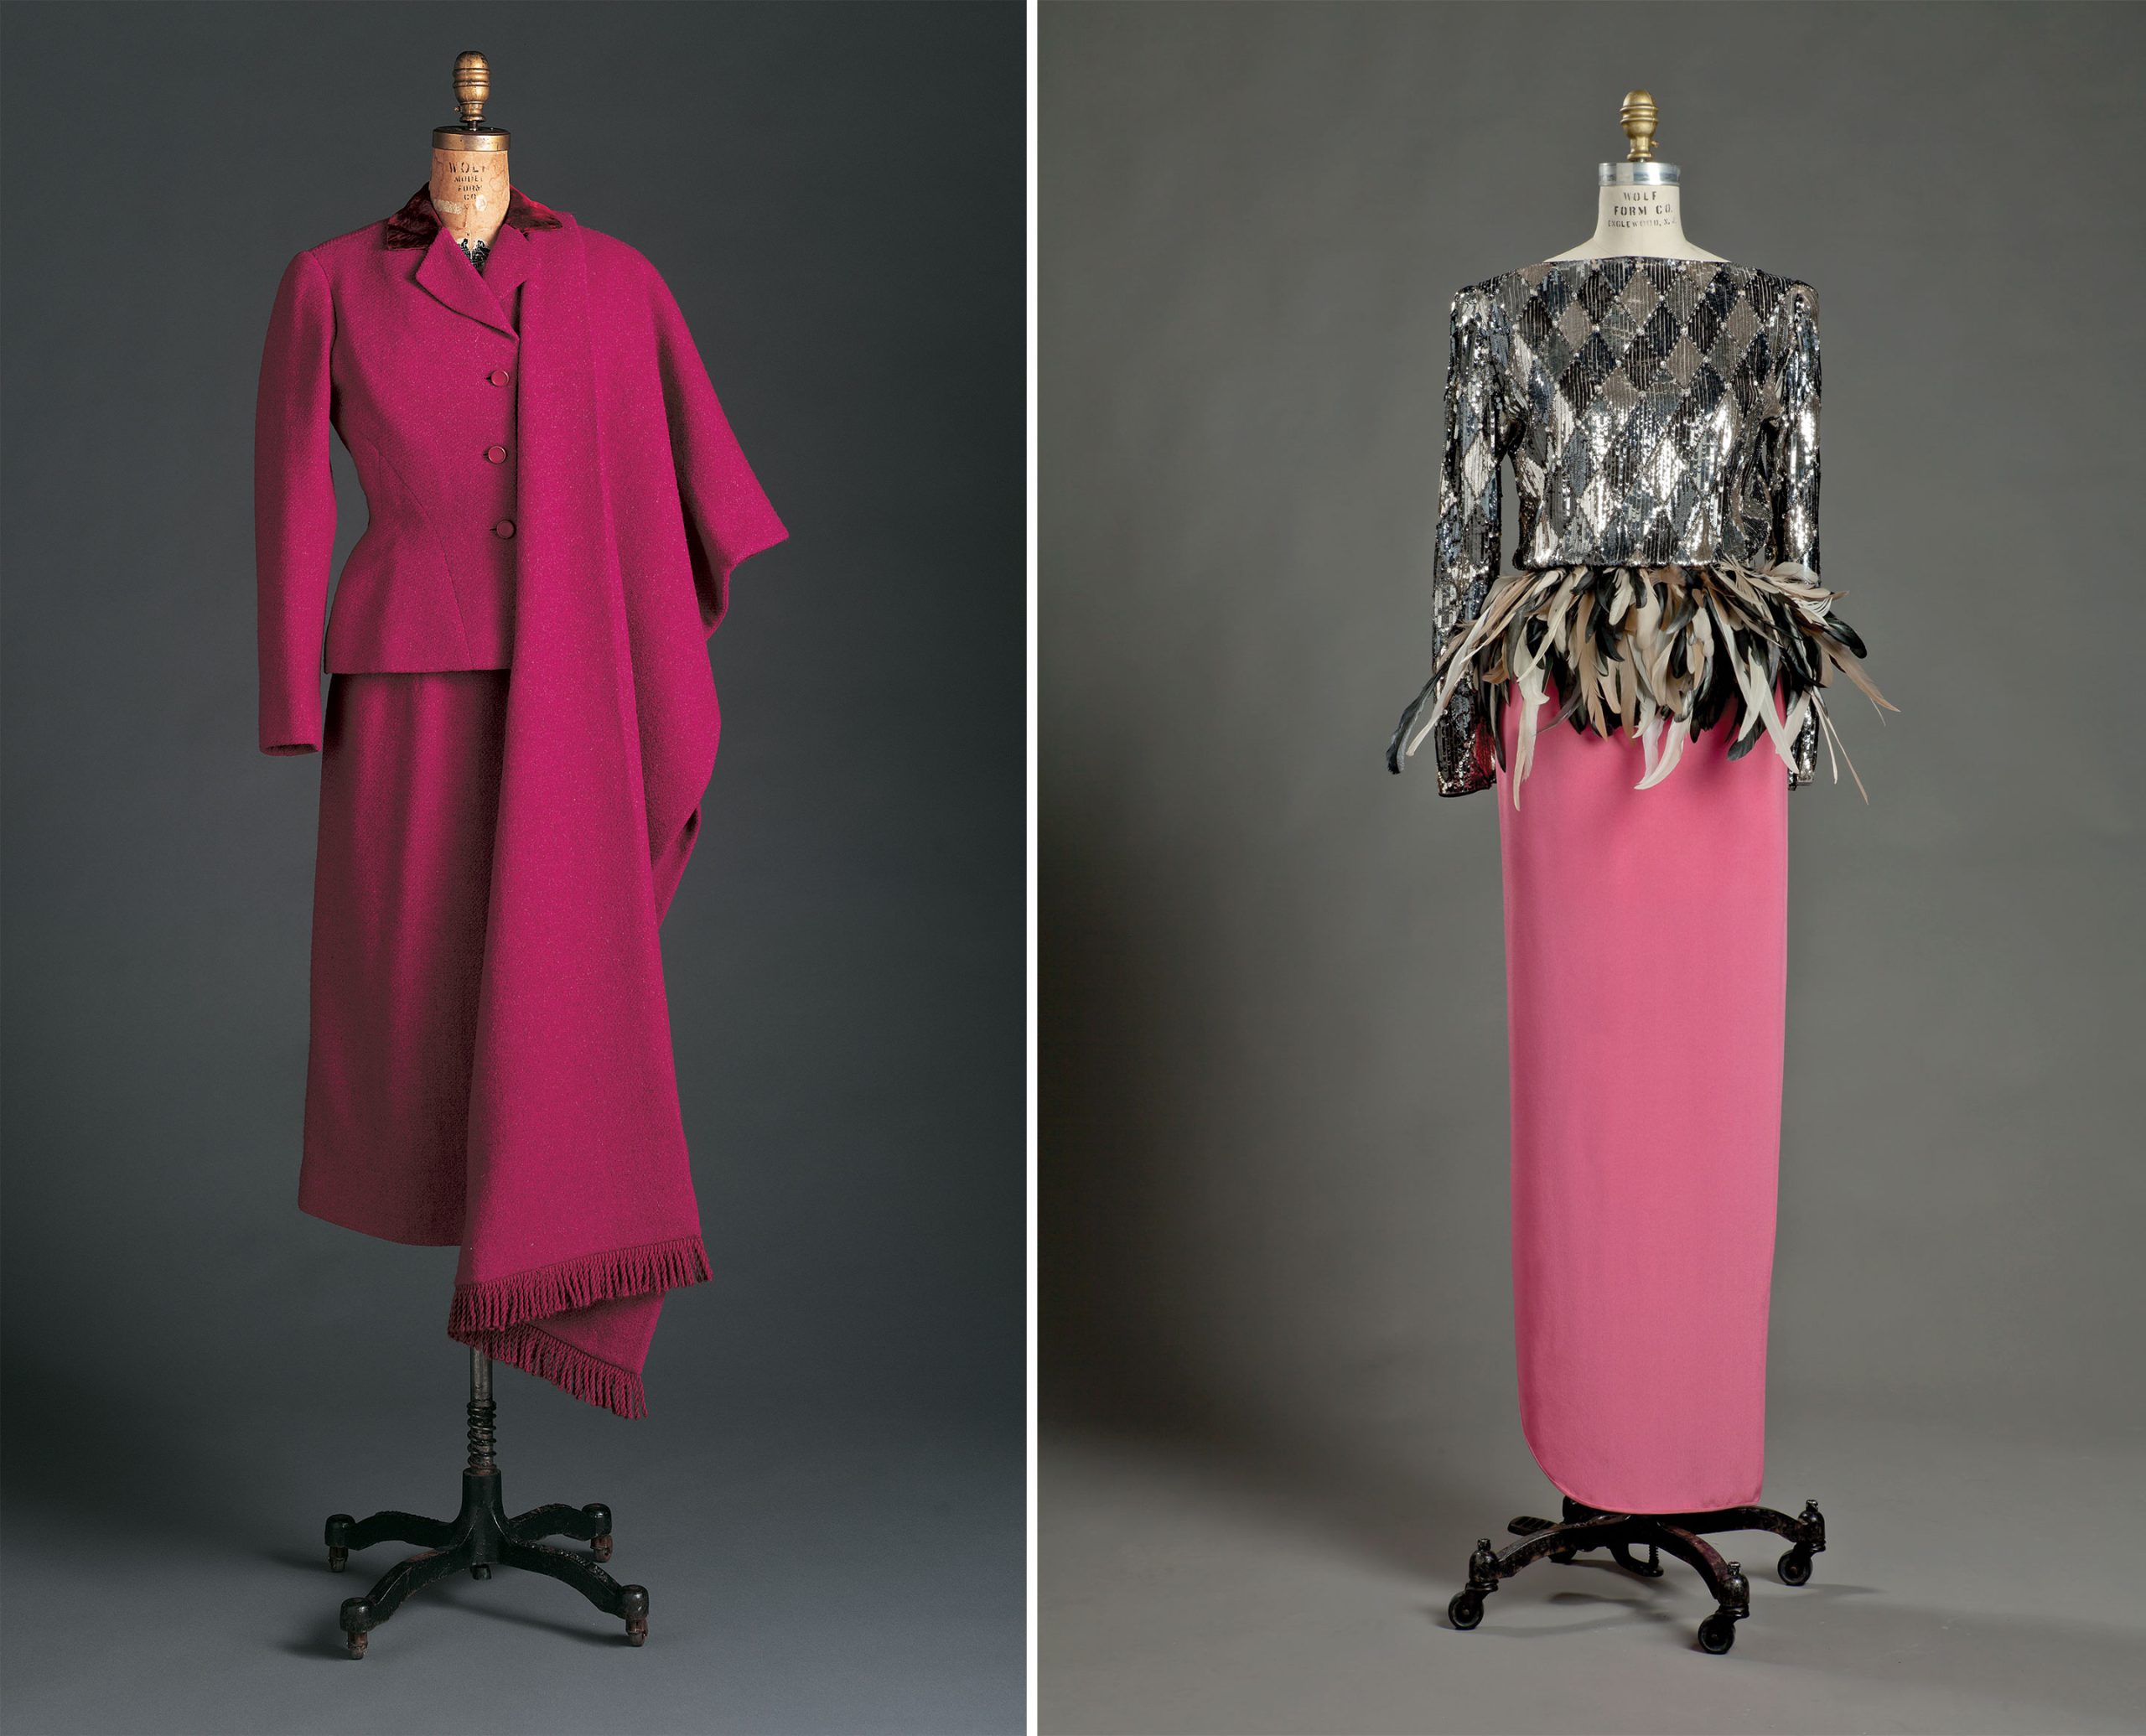 Christian Dior, Suit jacket, 1952. Wool and velvet. Collection of Phoenix Art Museum. Gift of Mrs. Donald D. Harrington; Valentino, Dress, c. 1982. Silk crepe with sequins and dyed feathers. Collection of Phoenix Art Museum. Gift of Georgette Mosbacher.